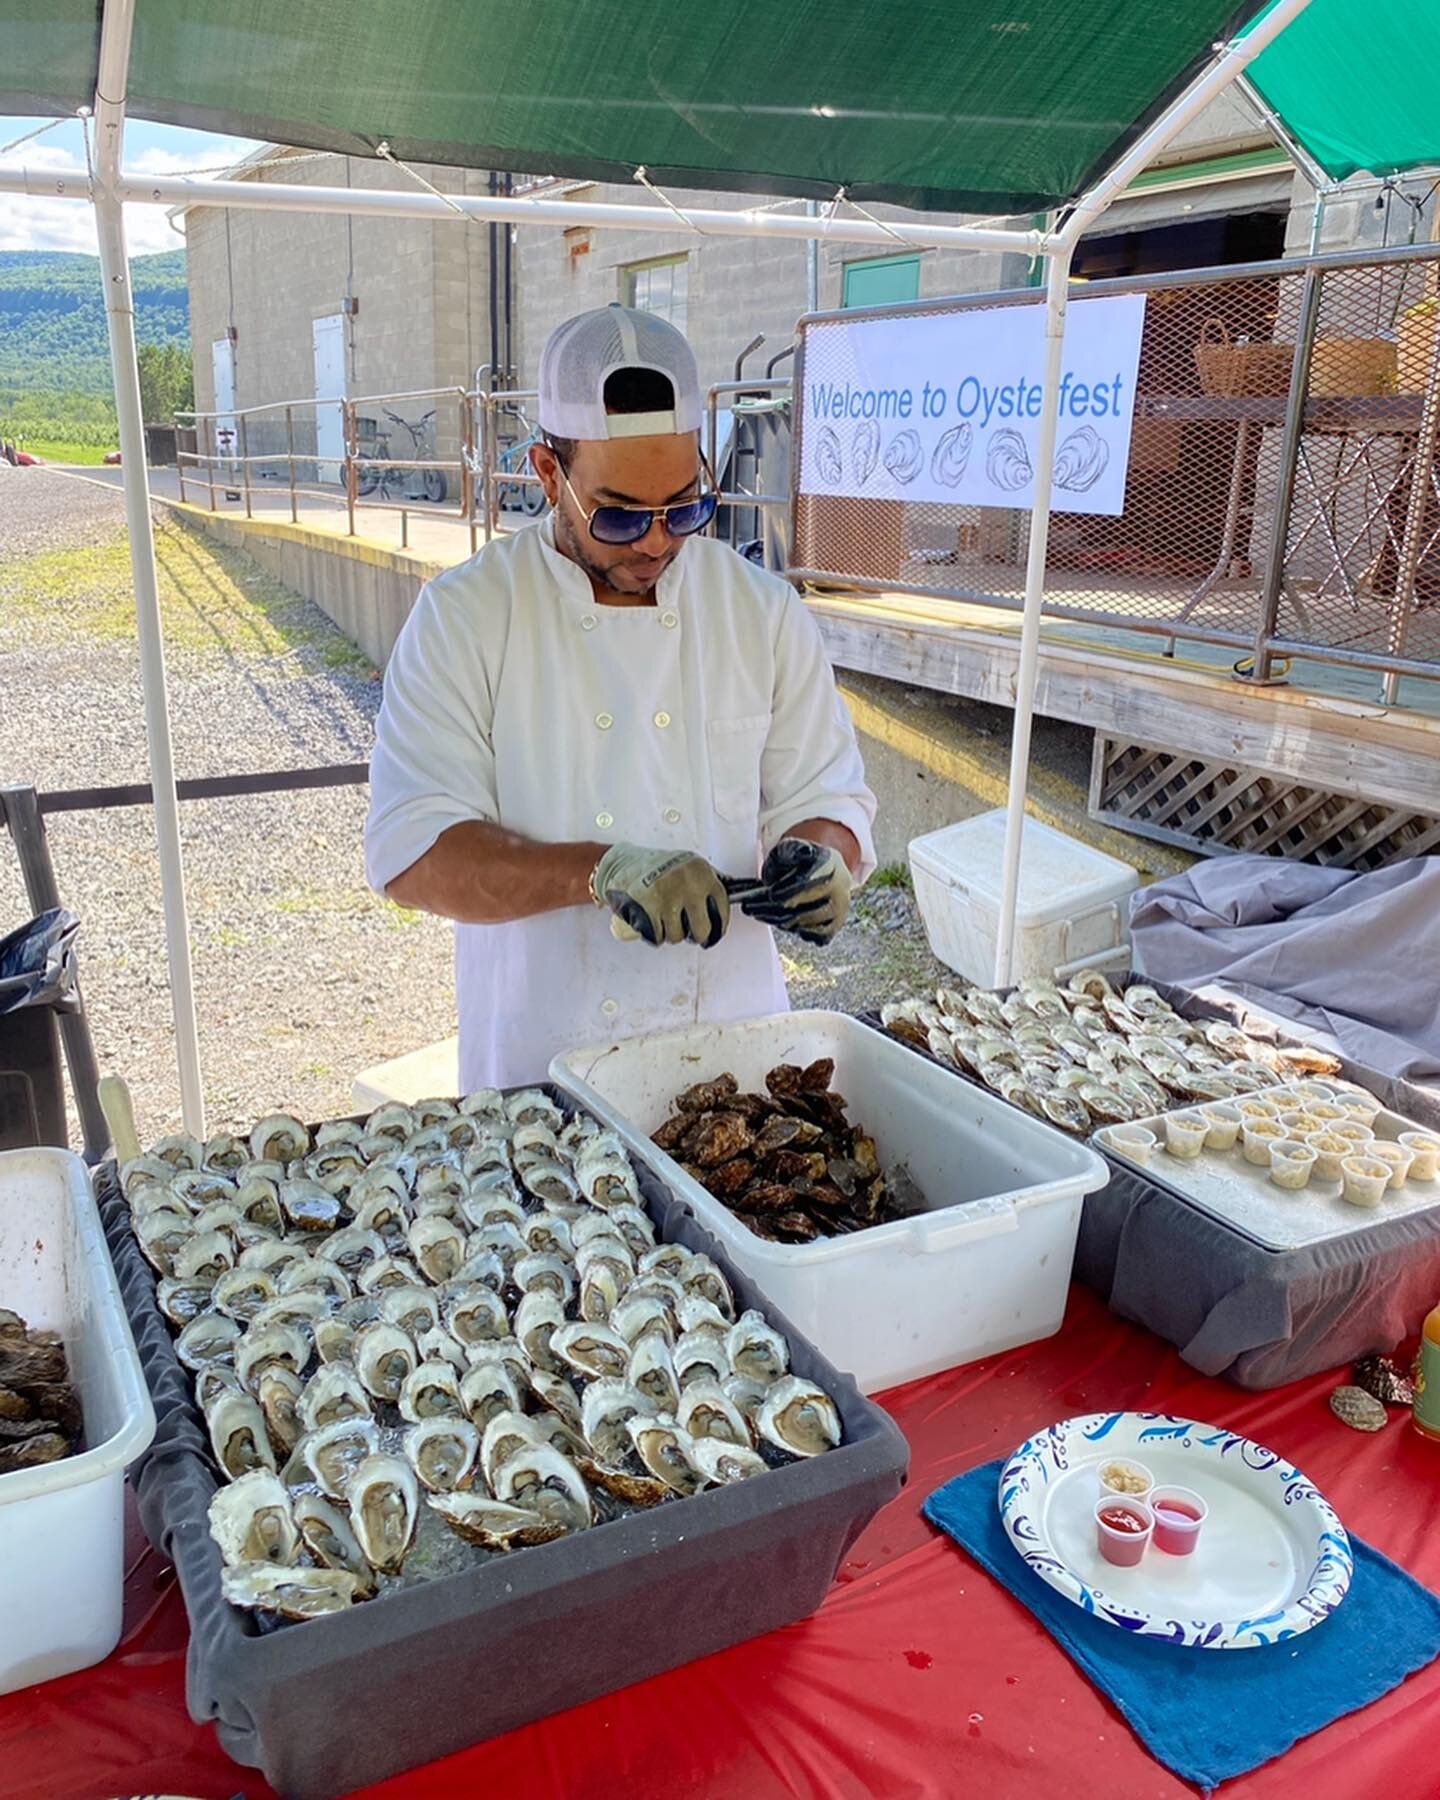 Thank you so much to everyone who helped make the fourth &ldquo;ILF &amp; TMS Oyster Fest&rdquo; @indianladderfarms and @indianladderfarmsciderybrewery such a huge success.  We&rsquo;ll &ldquo;pick&rdquo; a date soon for another during the height of?